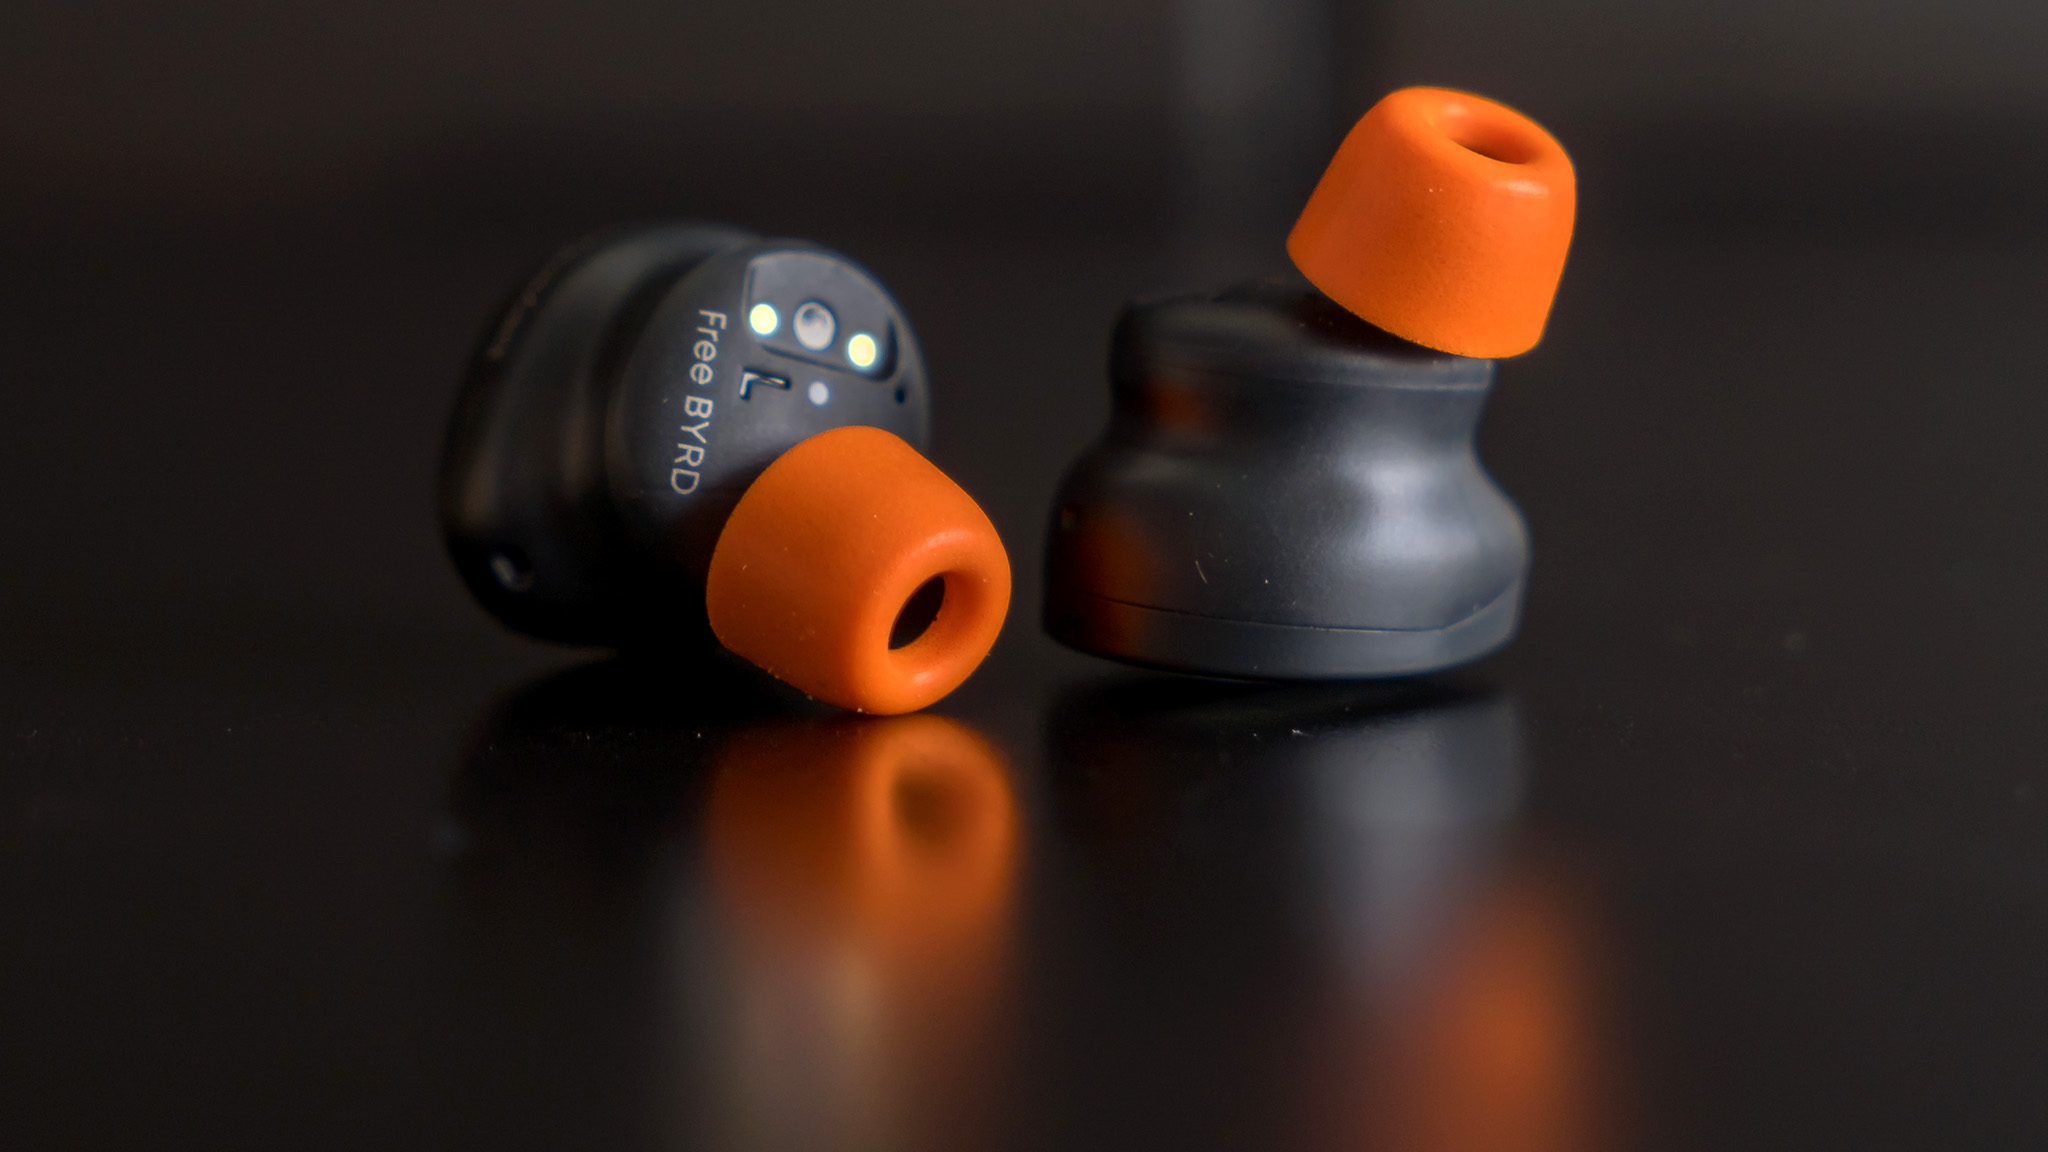 The Beyerdynamic Free Byrd earbuds with foam tips attached.